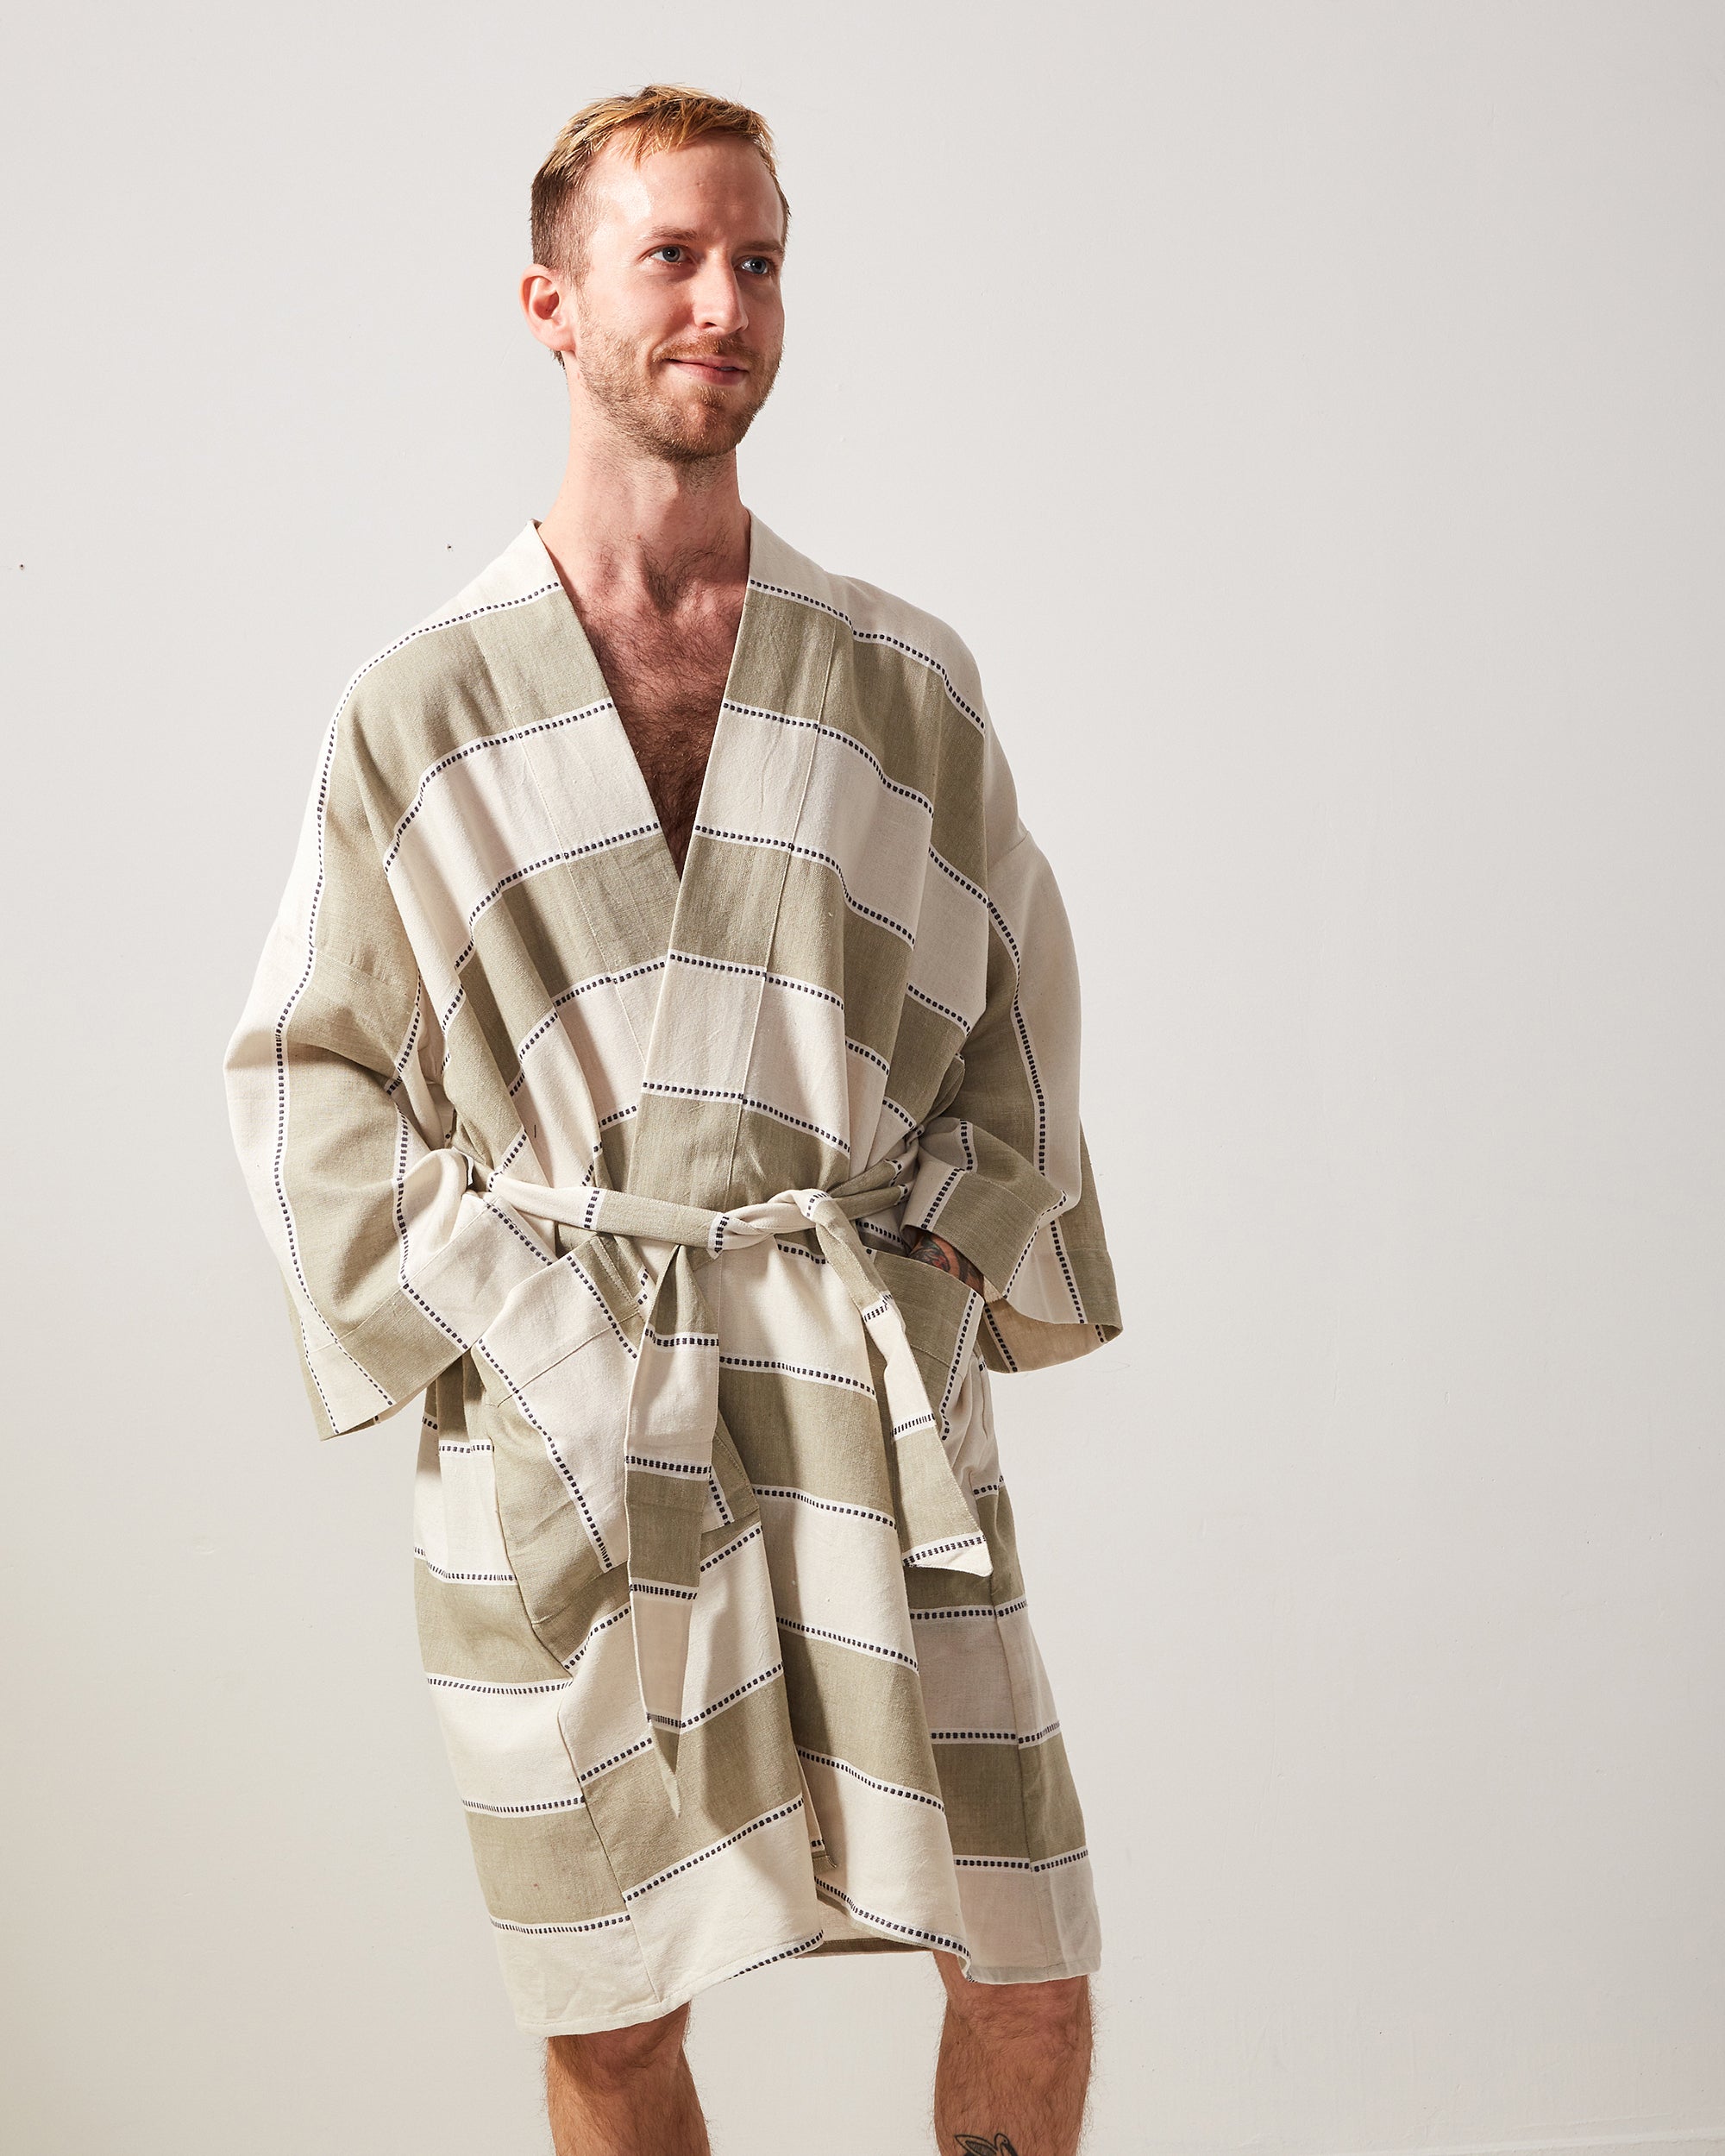 Ethically handwoven robe designed by MINNA, sage green stripes.